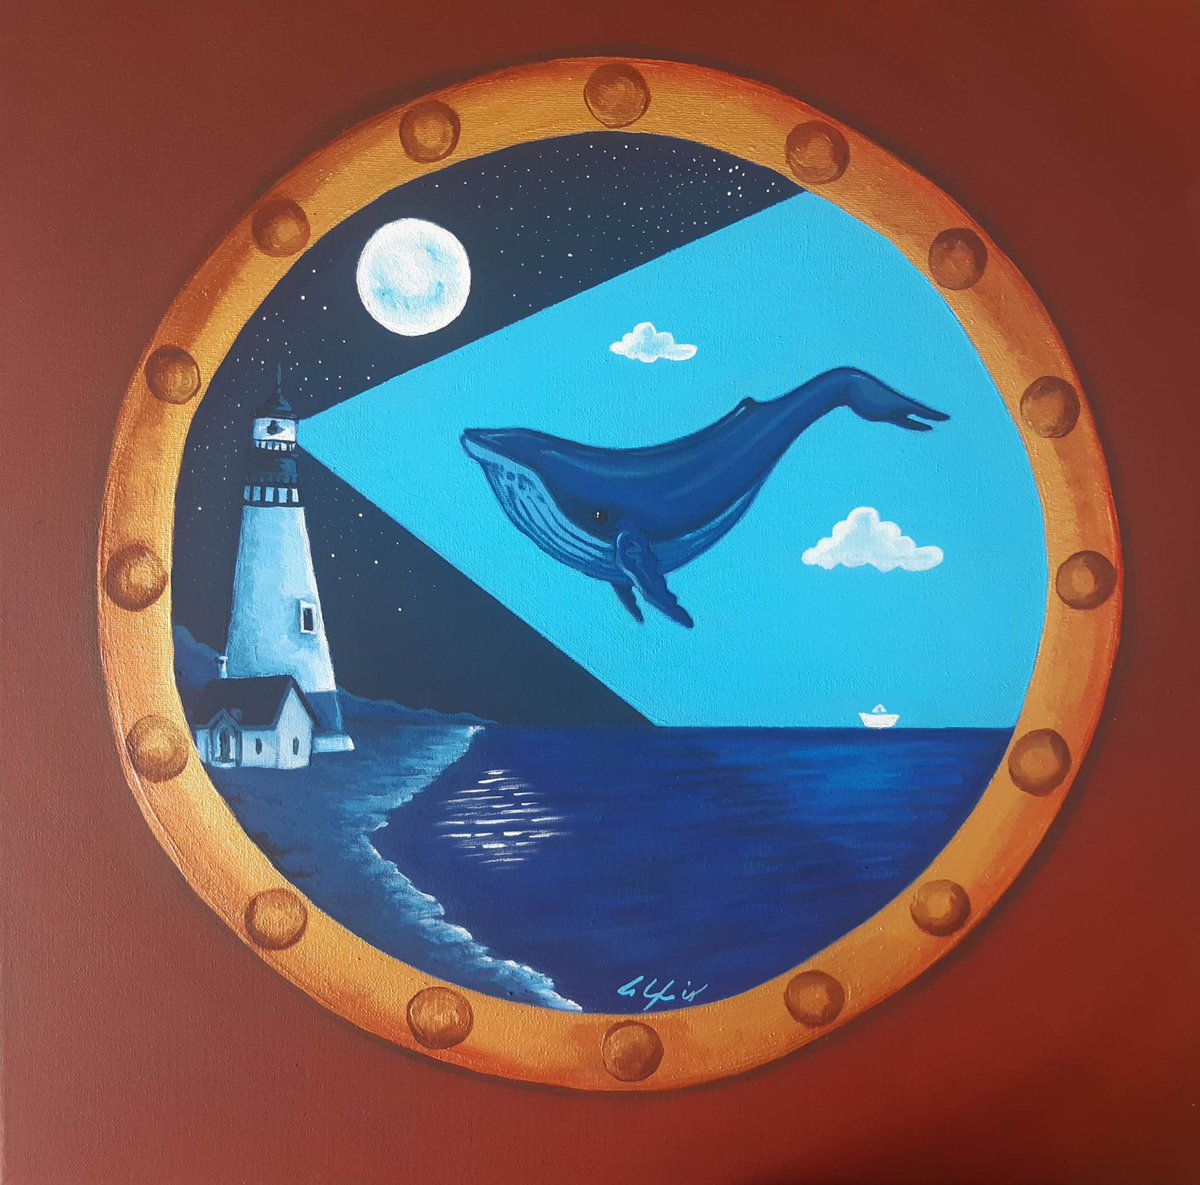 ...let your bright always light your path.

'Flying Whale' 
Art collection  
Acrilic on canvas  
SOLD

#AlexisBerny
#visualartist #artistavisual 
#art #artwork #arte #paintingart #paintings #pintura #whale #whales #whaleart #whalesart #whalesartwork #cabo #LosCabos #Baja #BCS